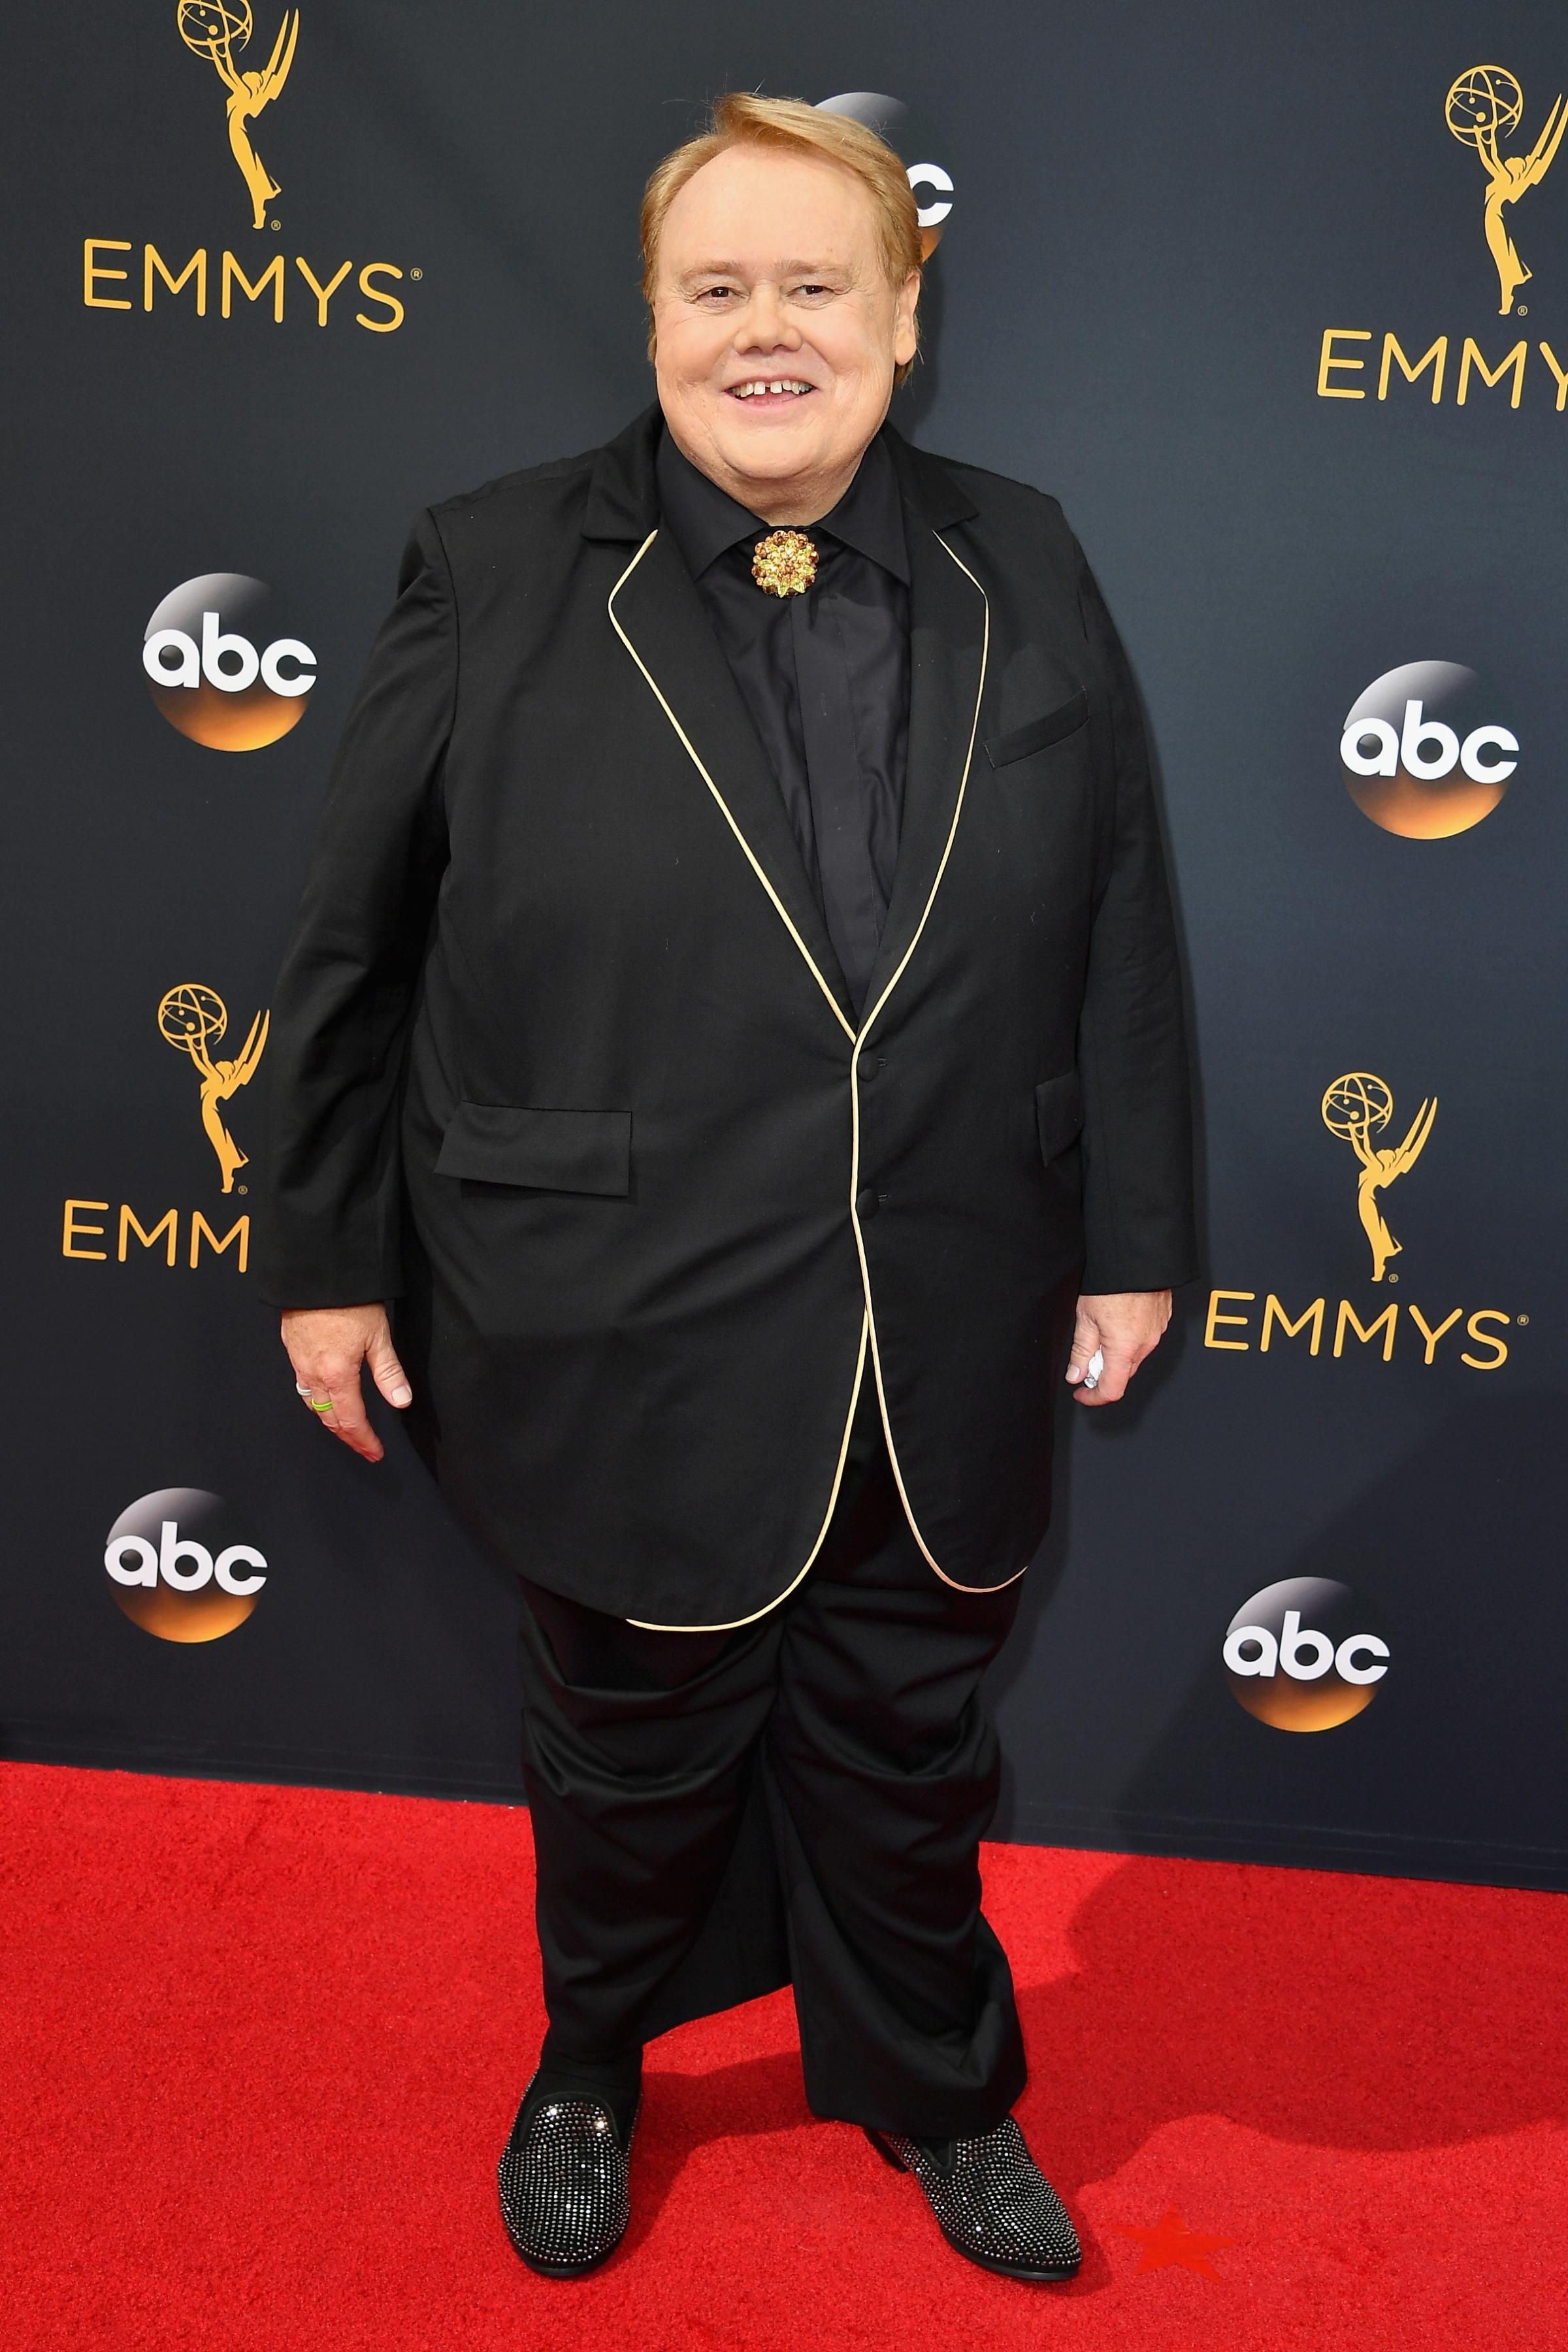 Louie Anderson arrives at the 68th Annual Primetime Emmy Awards at Microsoft Theater on September 18, 2016 in Los Angeles.